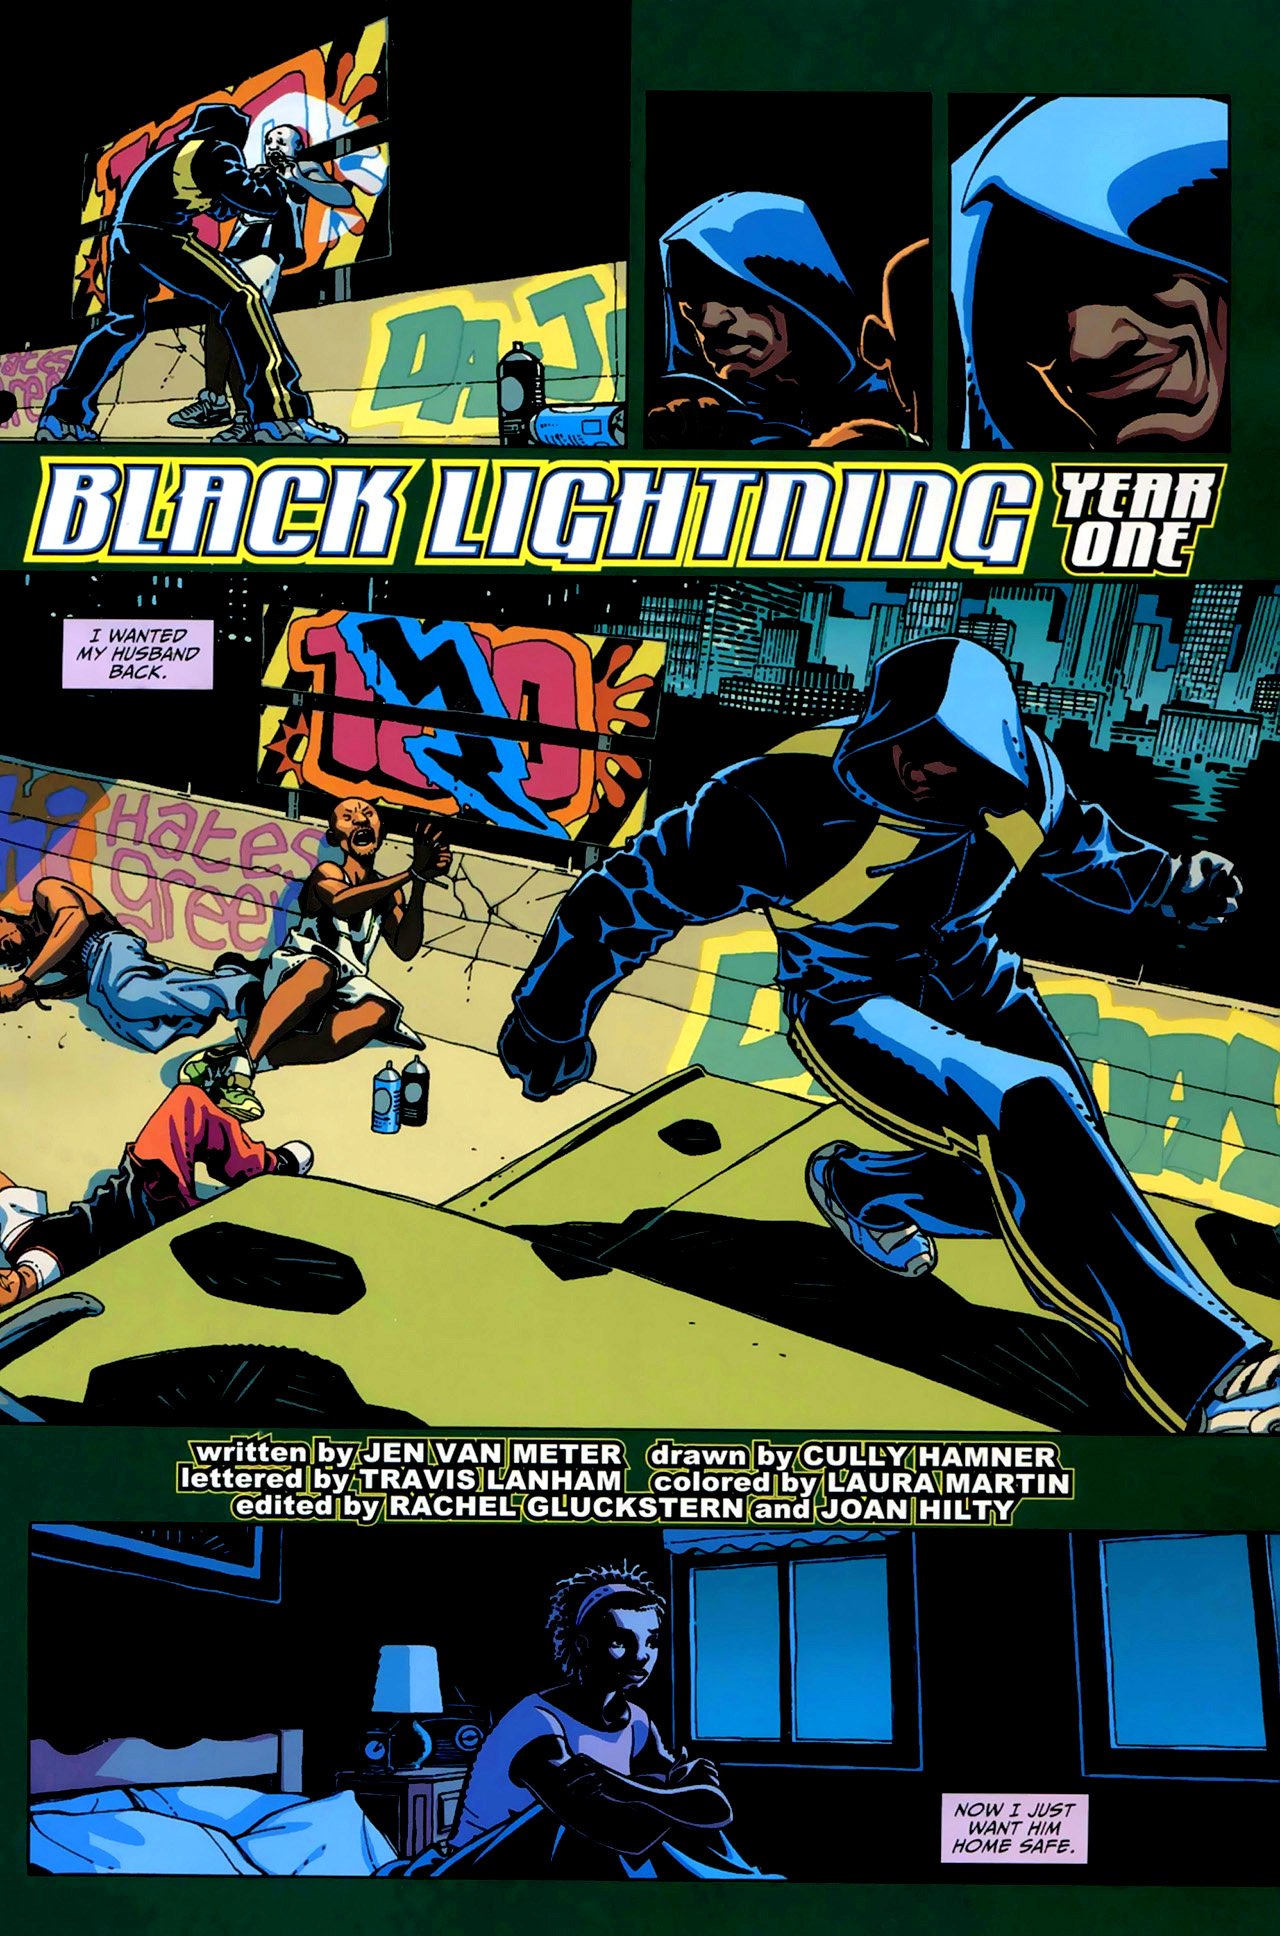 Read online Black Lightning: Year One comic -  Issue #1 - 4